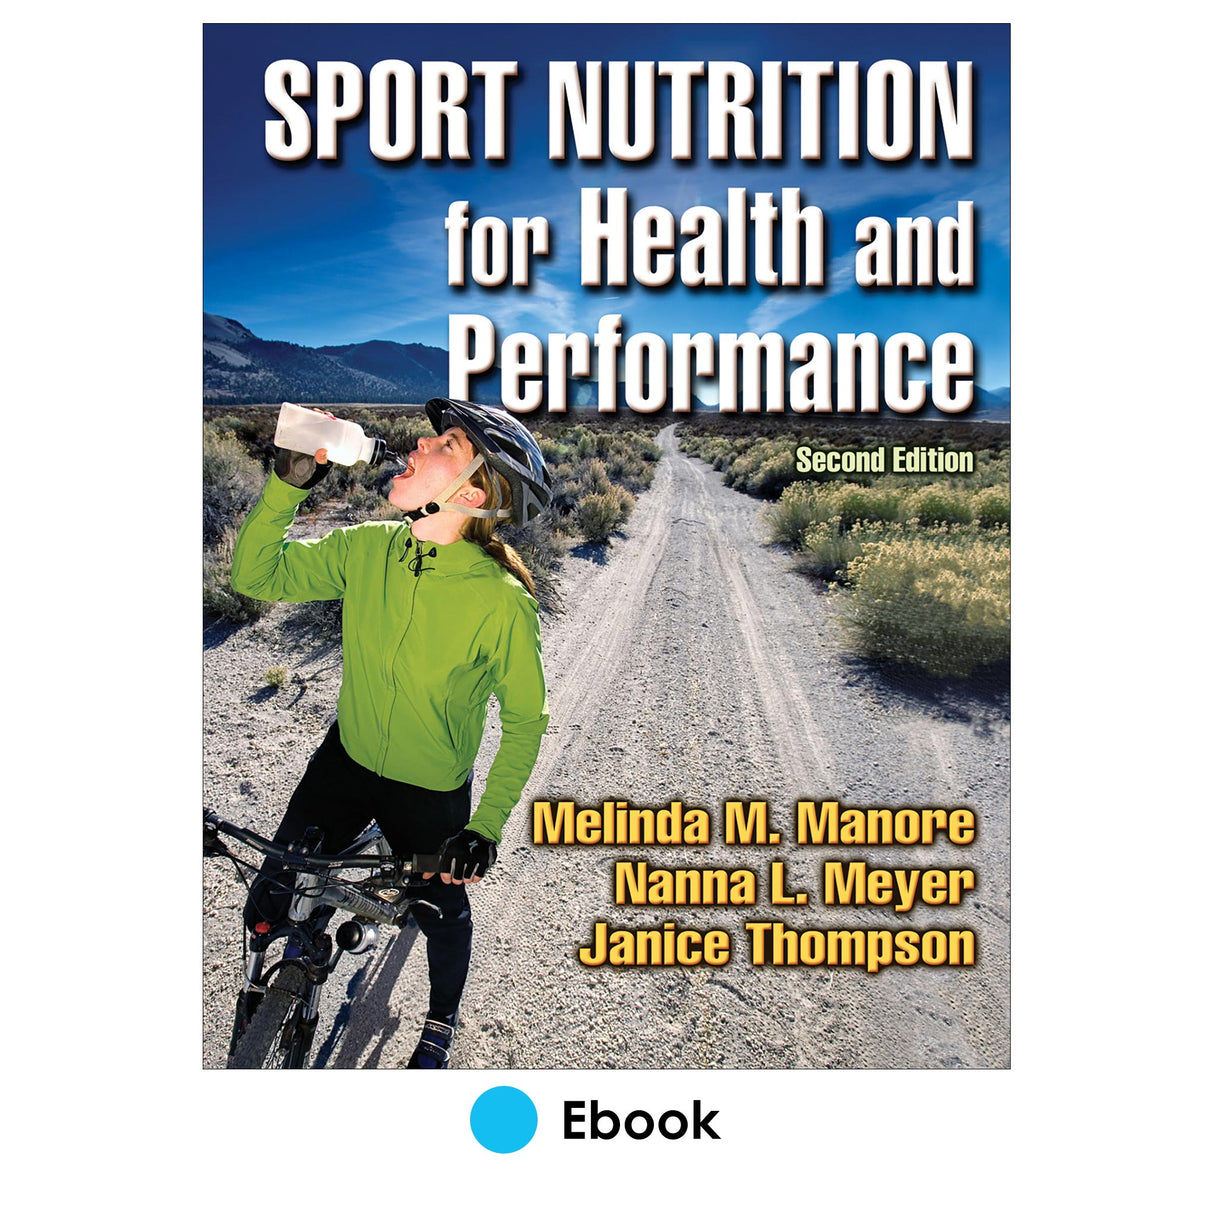 Sport Nutrition for Health and Performance 2nd Edition PDF